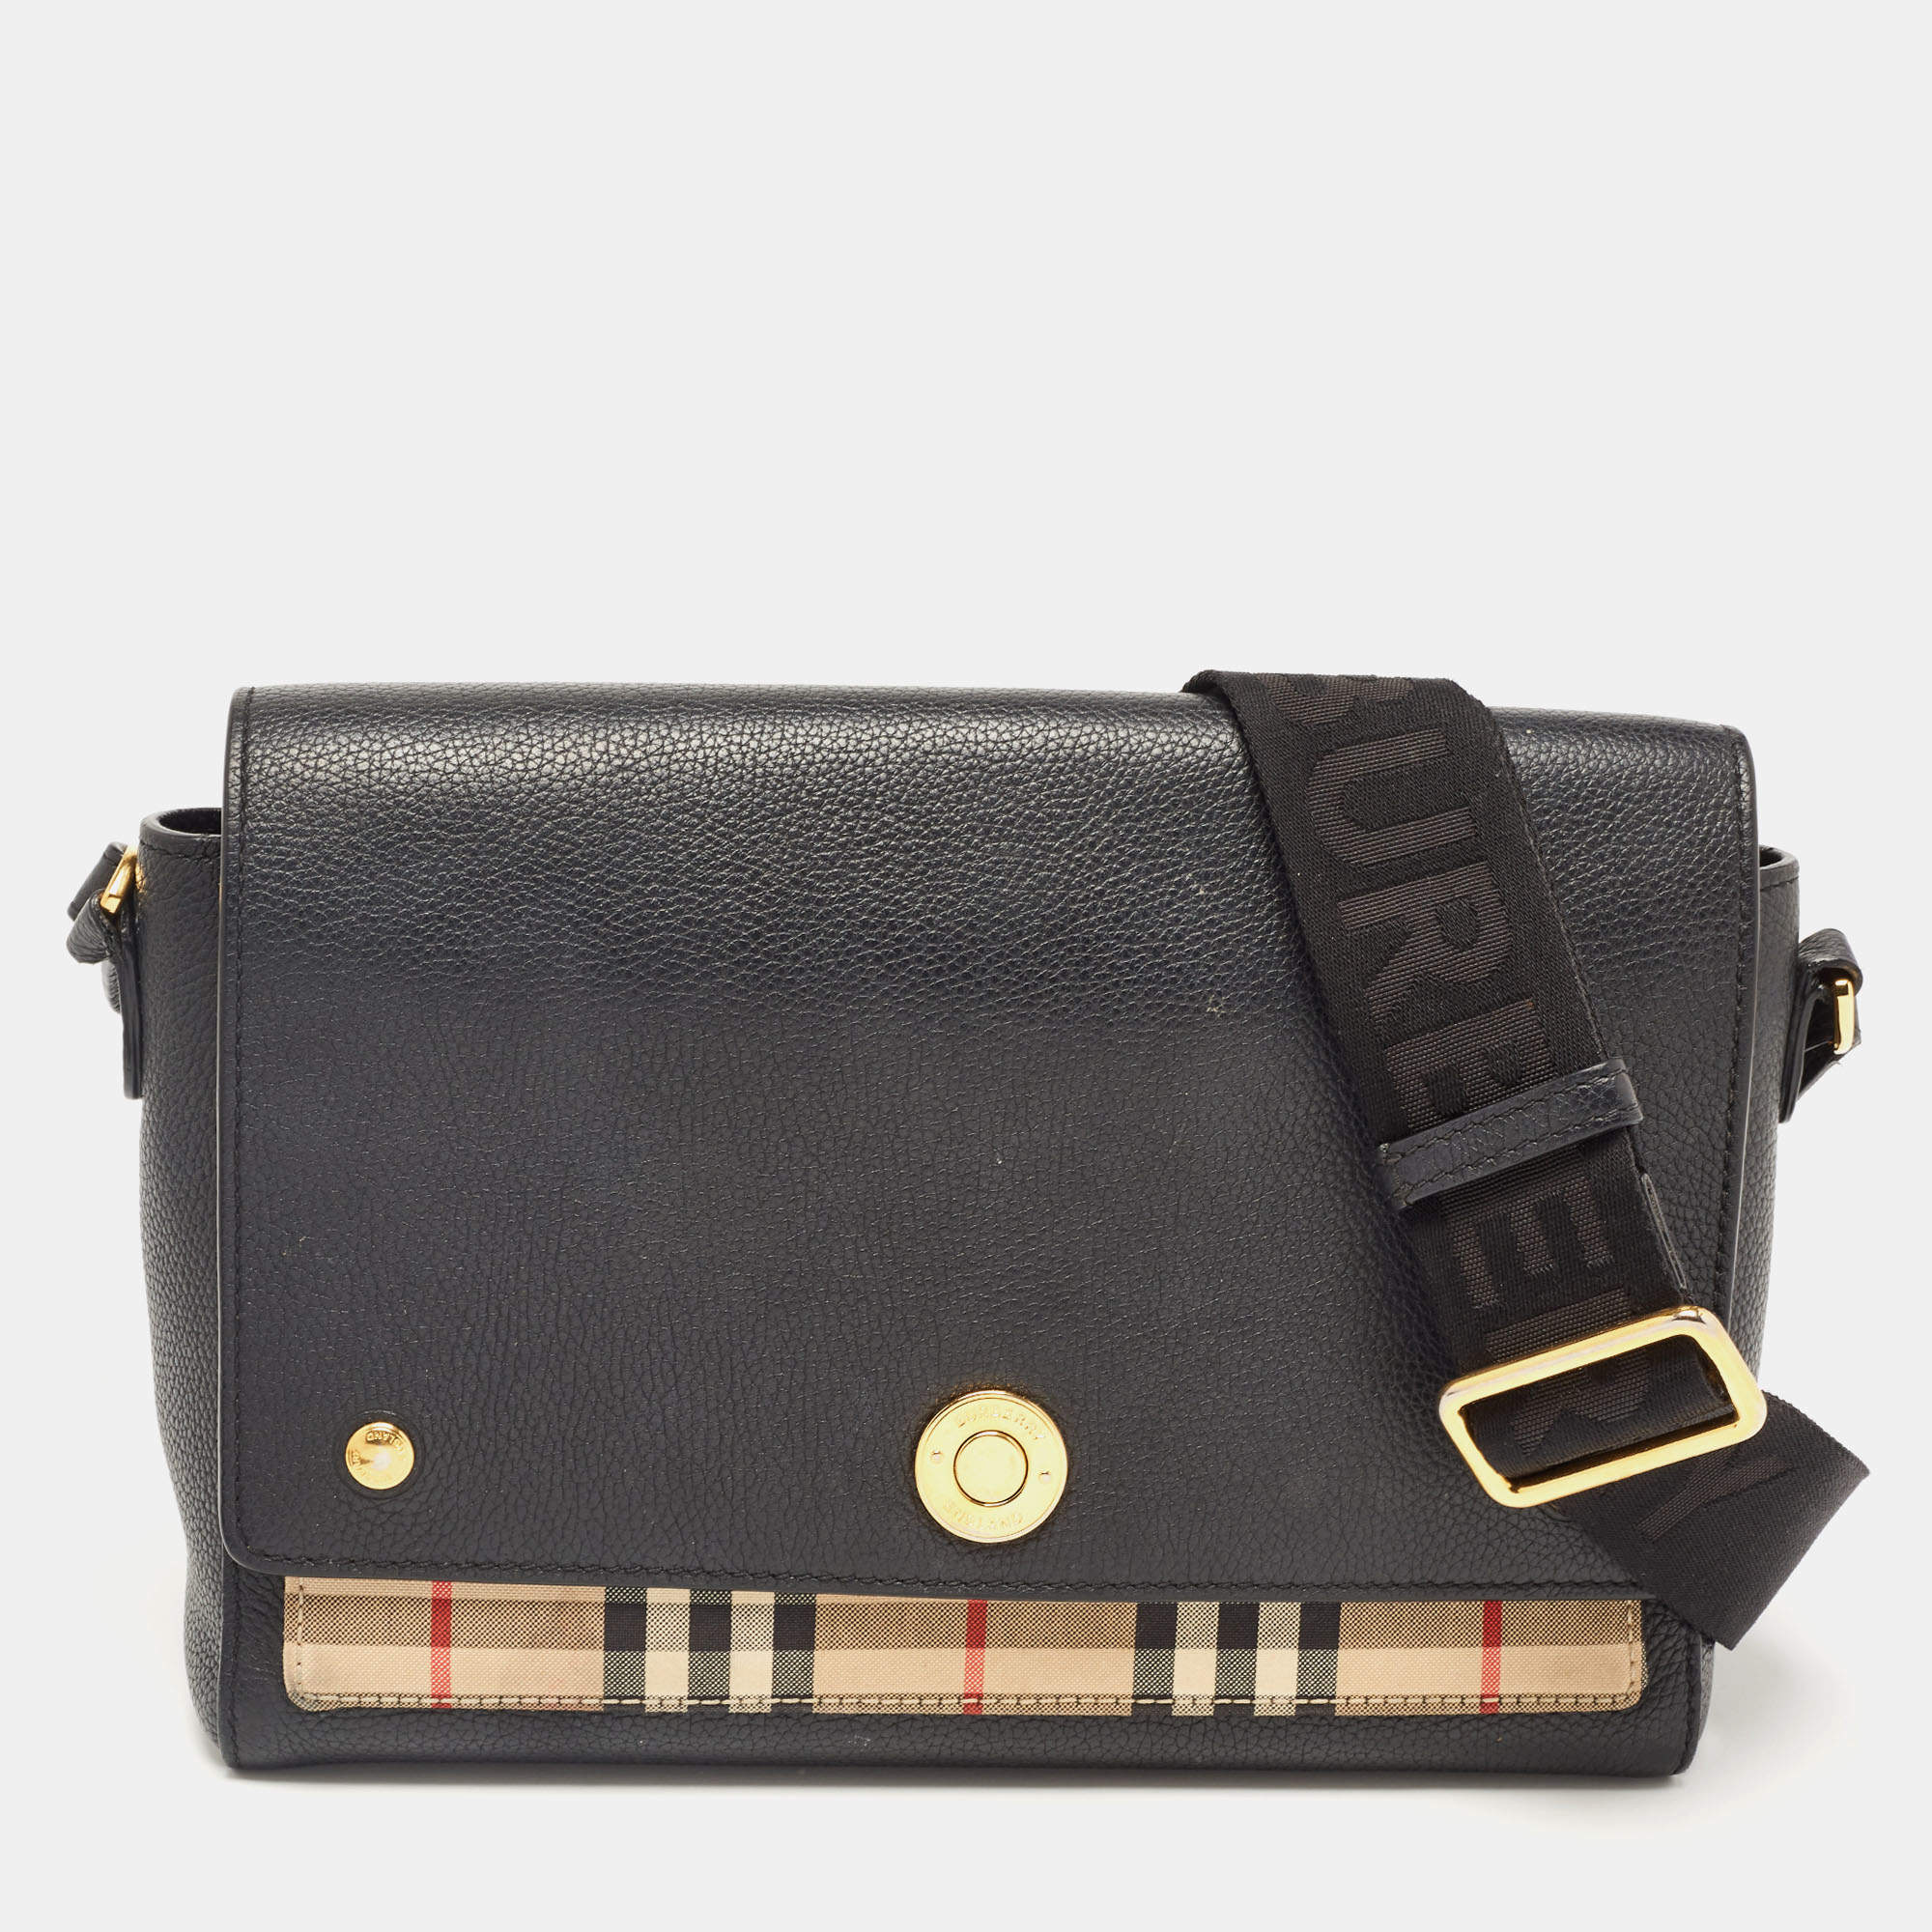 BURBERRY Shoulder bag OLYMPIA SMALL in black